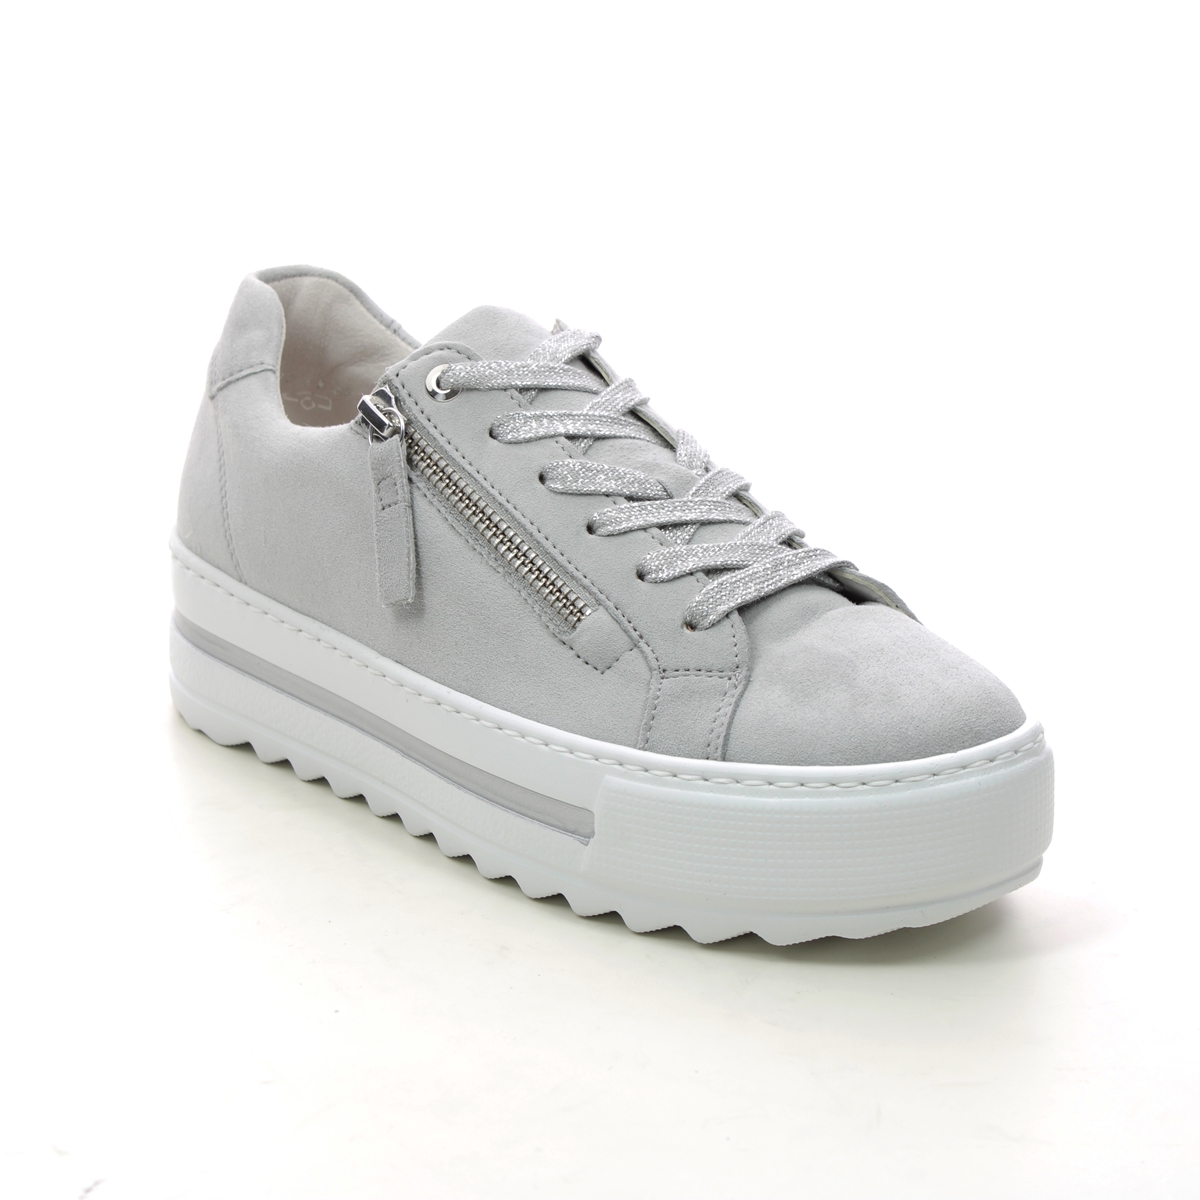 Gabor Heather Light Grey Suede Womens Trainers 26.498.40 In Size 6.5 In Plain Light Grey Suede  Womens Trainers In Soft Light Grey Suede Leather